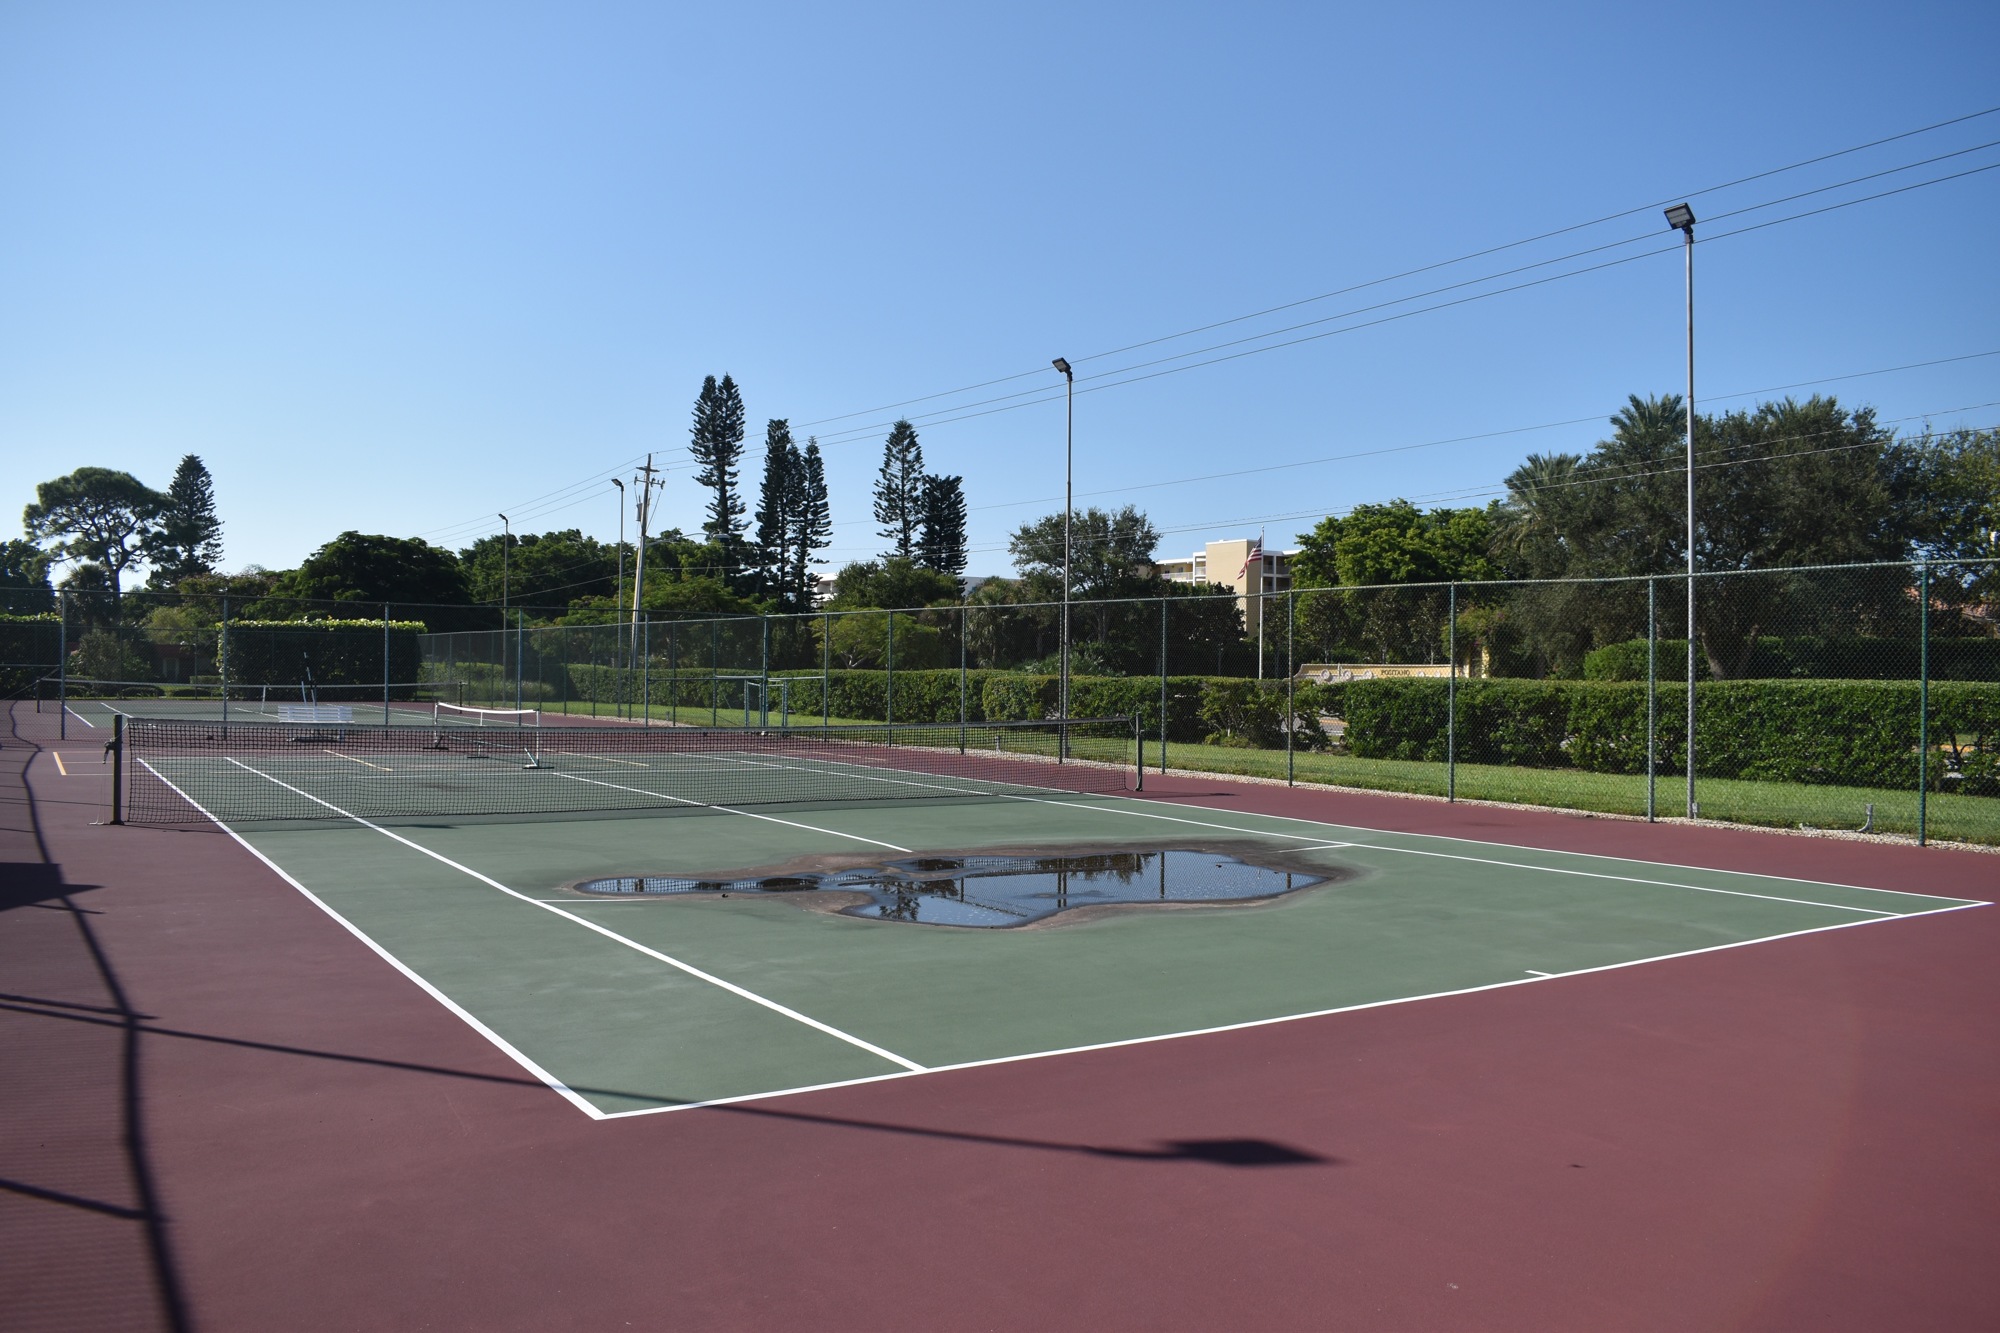 The Hideaway Bay tennis courts are currently in a relative state of disrepair.